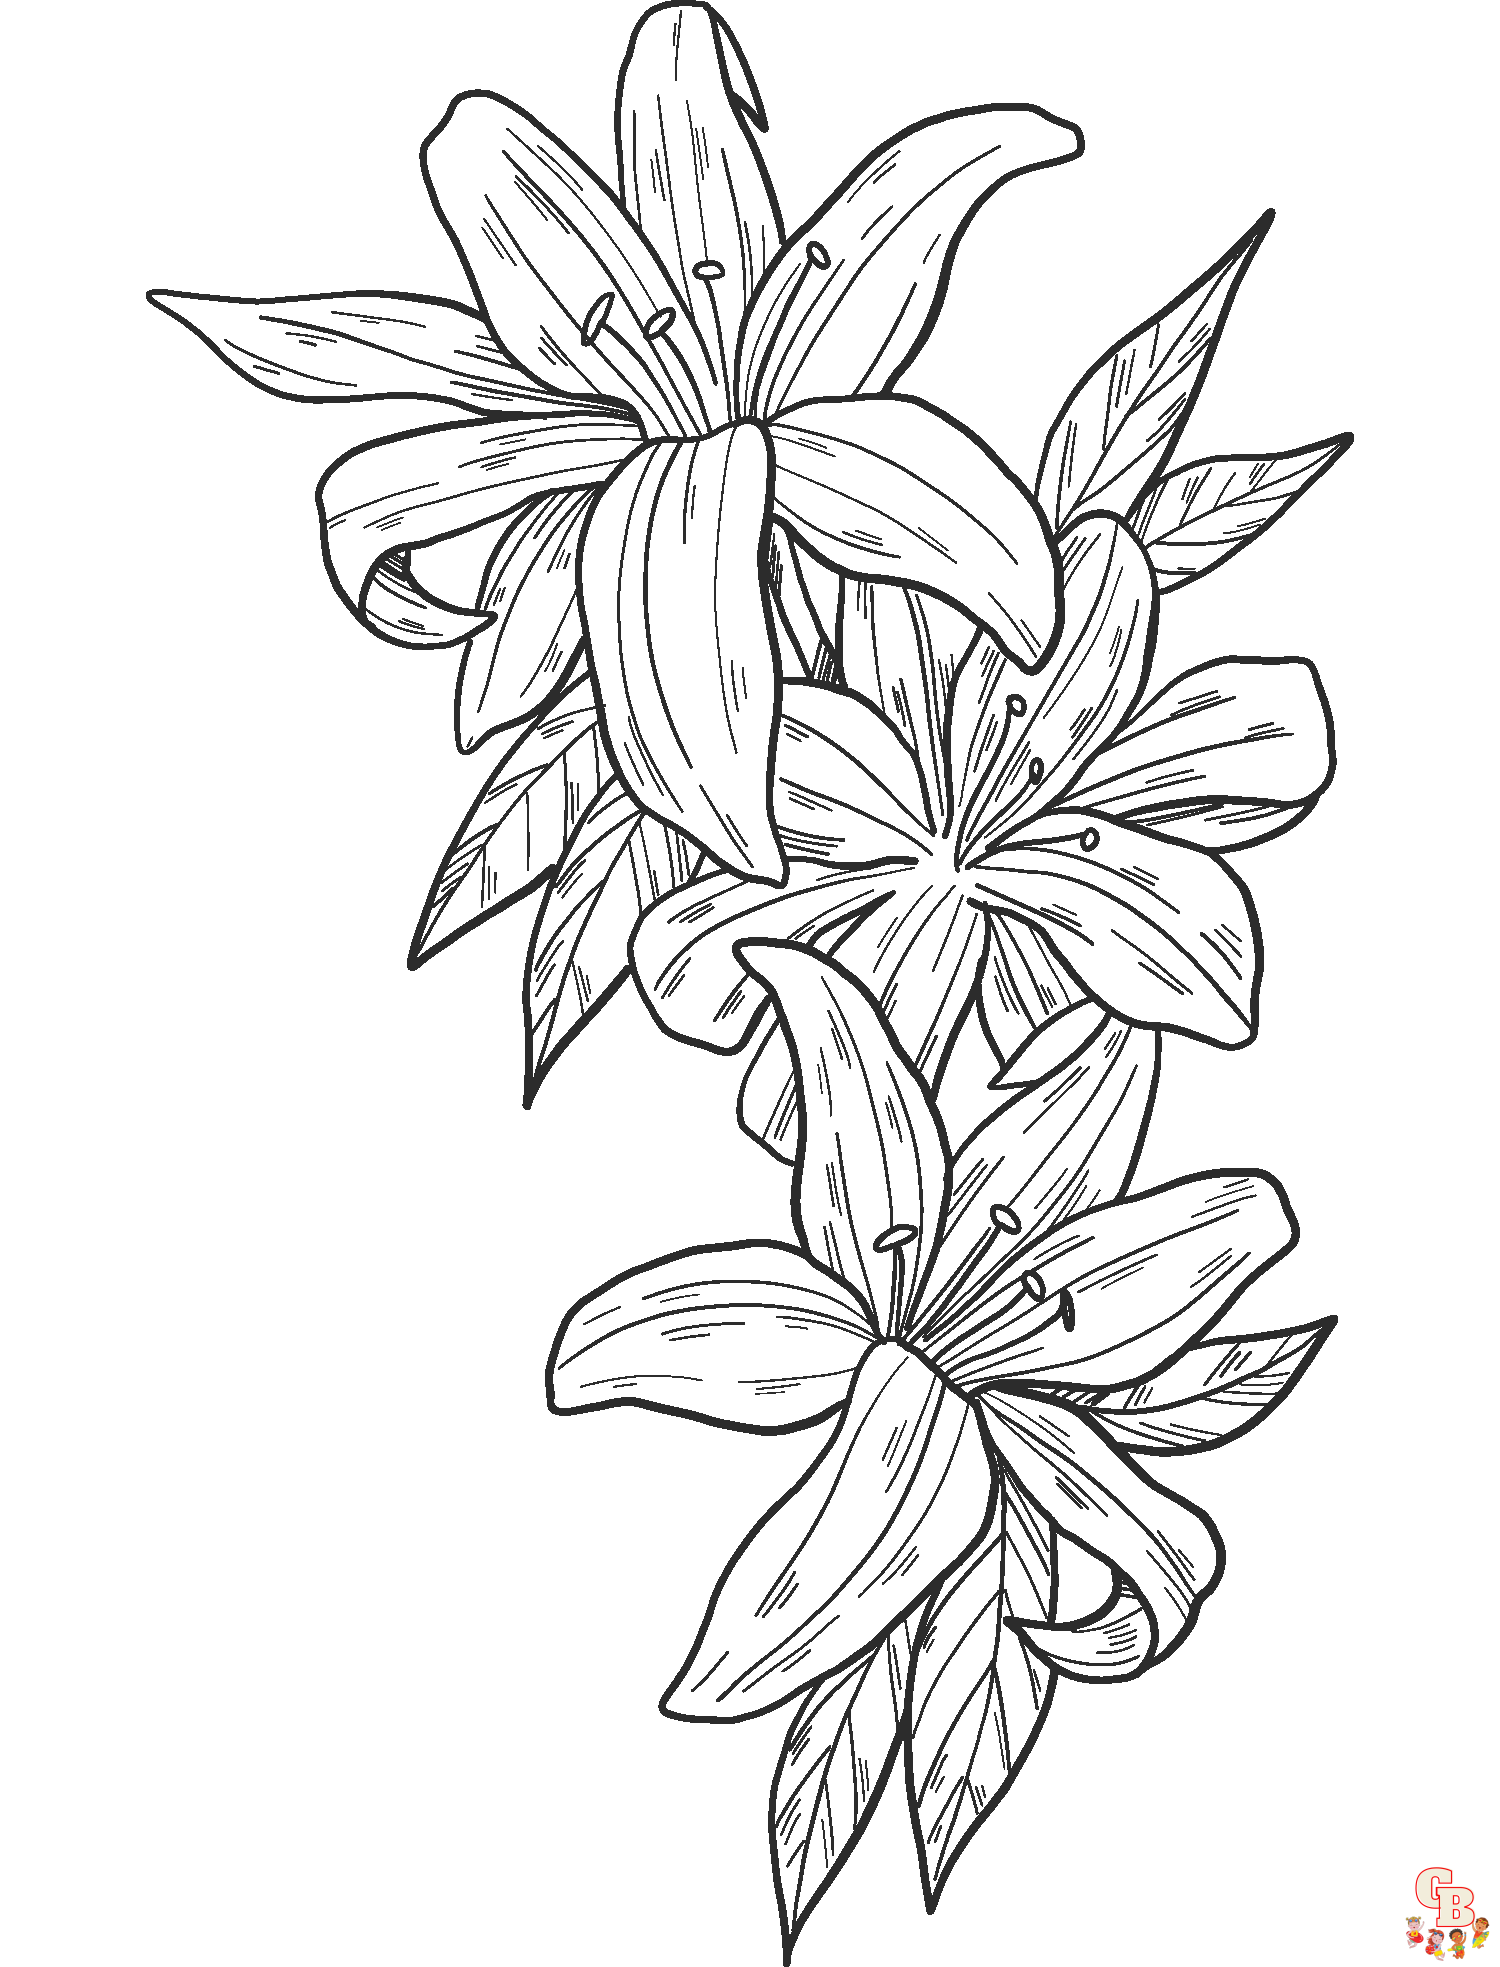 https://gbcoloring.com/wp-content/uploads/2023/03/lily-coloring-pages-1.png